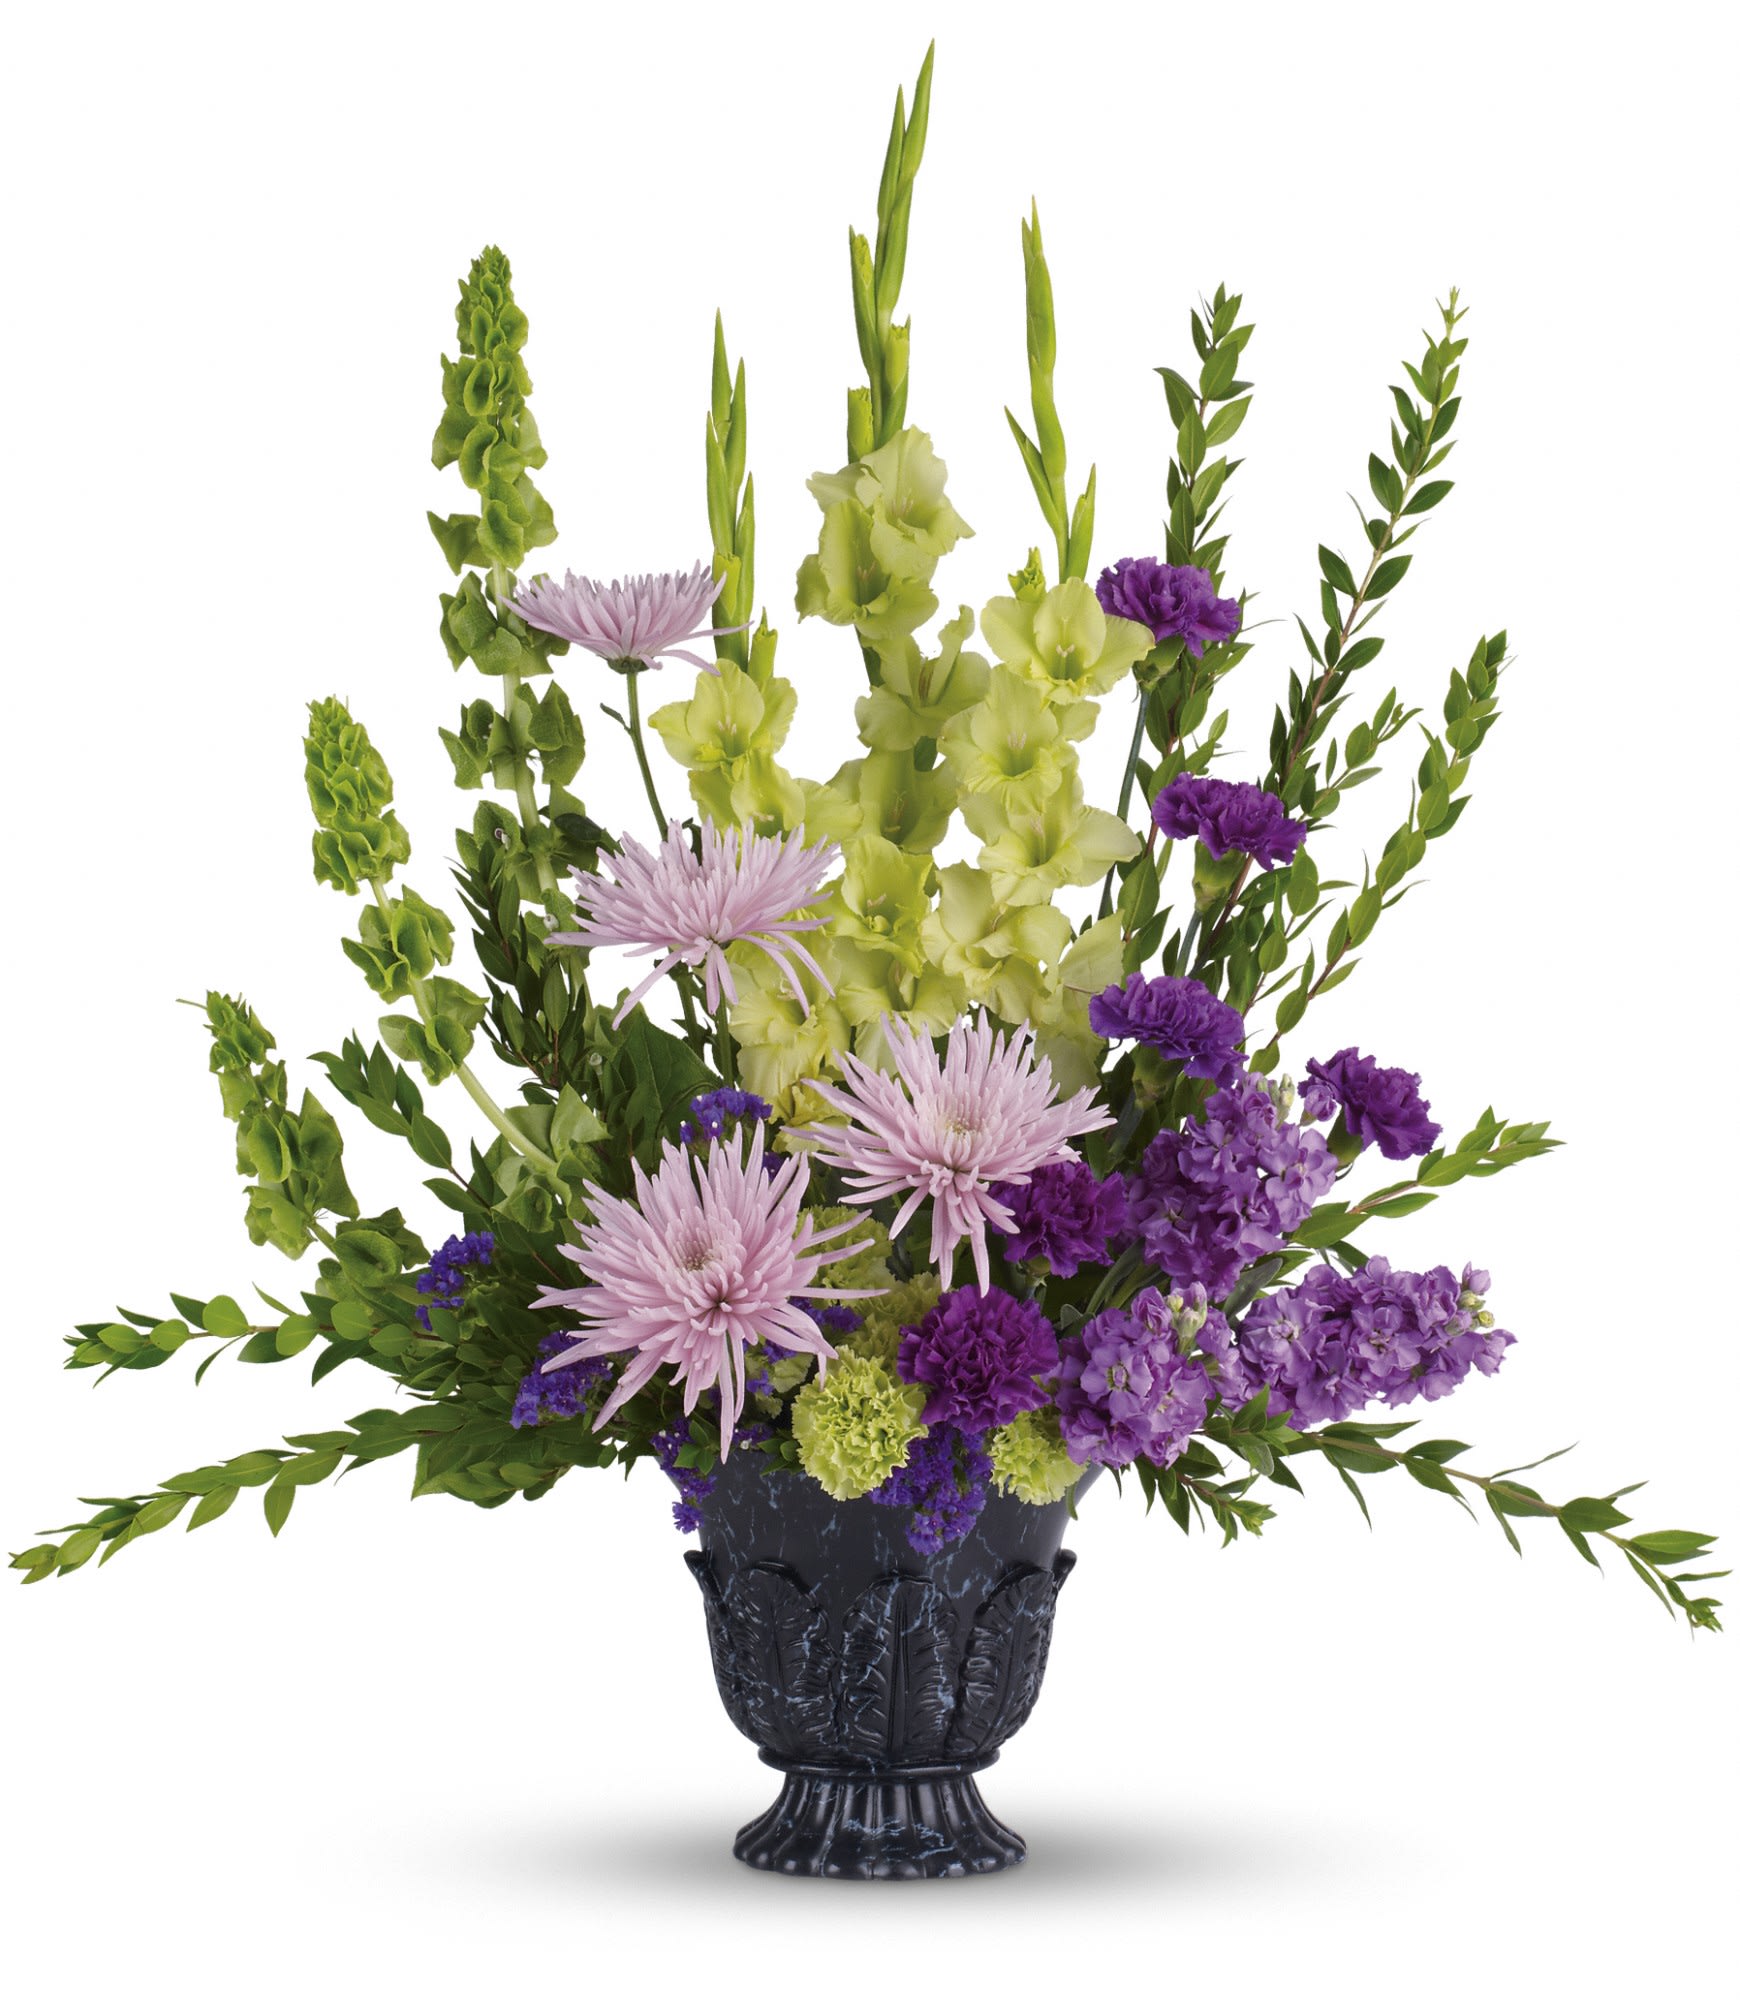 Teleflora's Cherished Memories  - This ethereally lovely bouquet of green gladioli, lavender stock, purple carnations and more in a timeless-tribute urn is a stunning choice for the memorial service.  